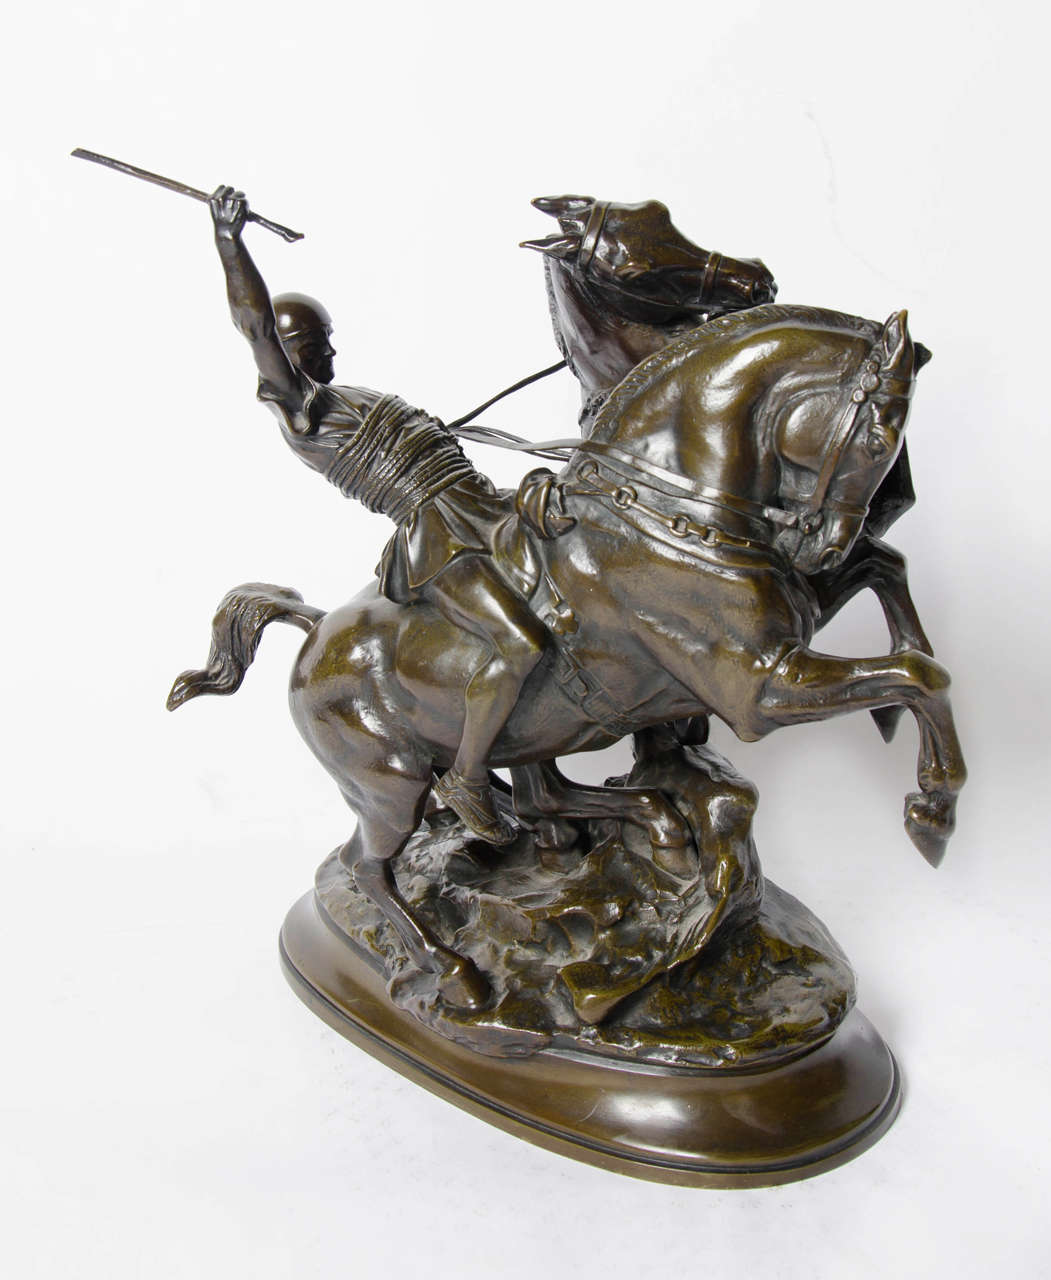 Cocher Romain by Emmanuel Fremiet (1824-1910), an impressive study of a Roman charioteer with two rearing horses. Brown green patination, stunning hand chased detail and characterization. Set onto a part naturalistic integral plinth with emblem